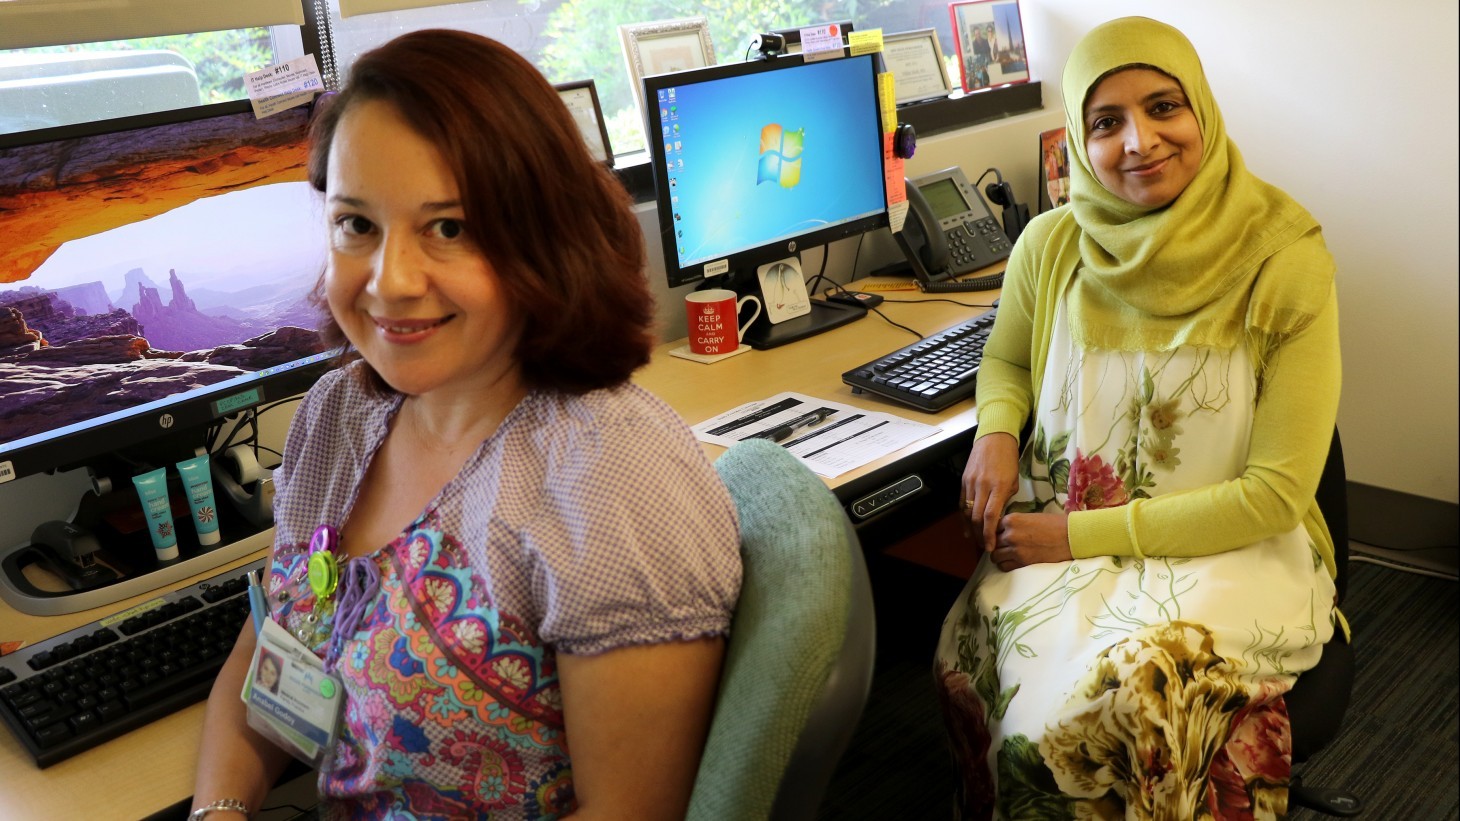 Two women, one wearing a yellow hijab, at a desk with a computer, smiling